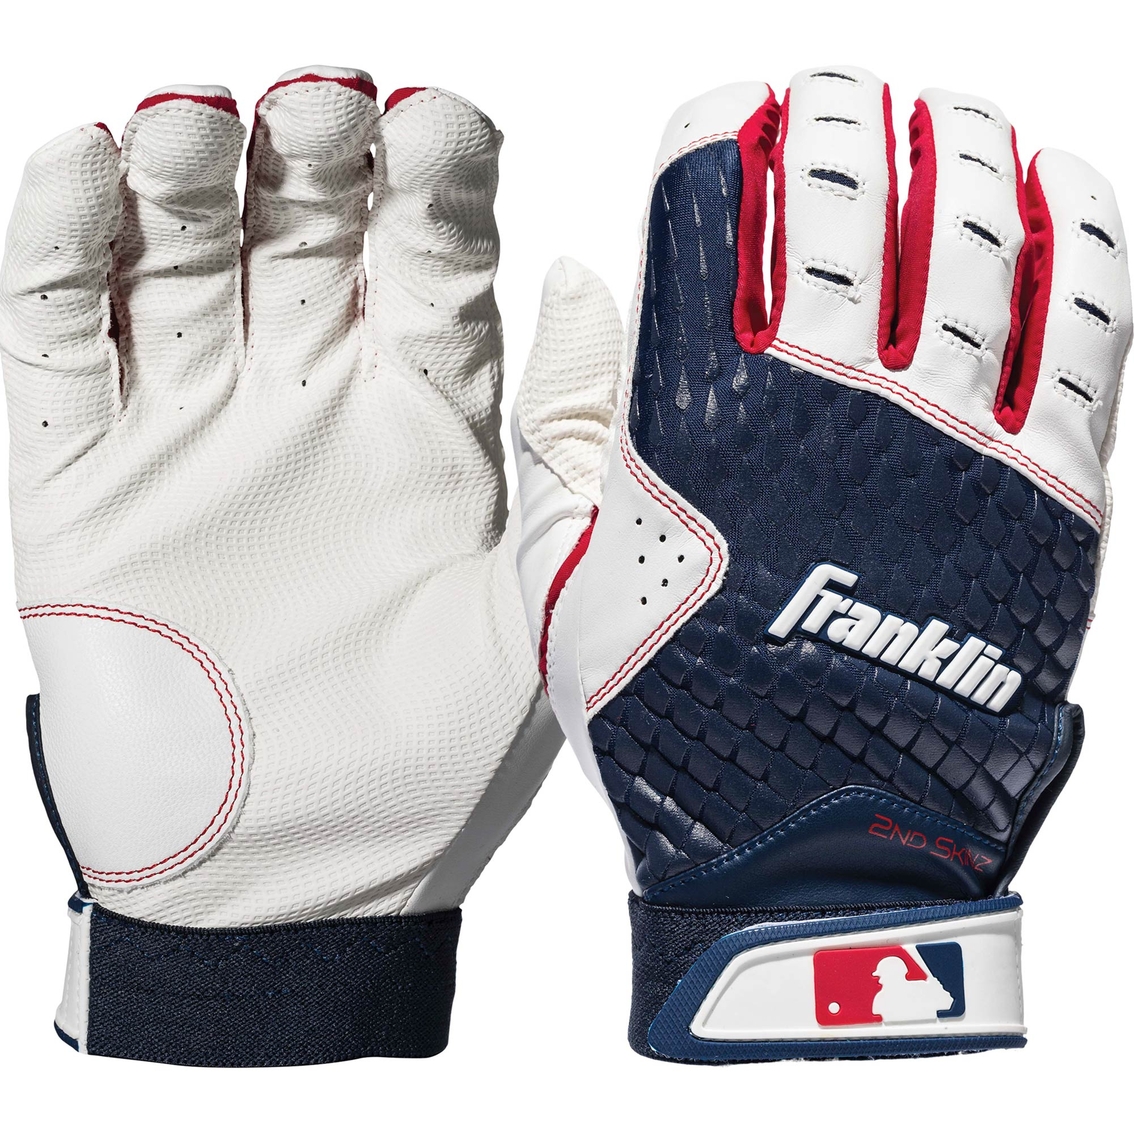 Franklin MLB Youth 2nd Skinz White, Navy and Red Batting Glove